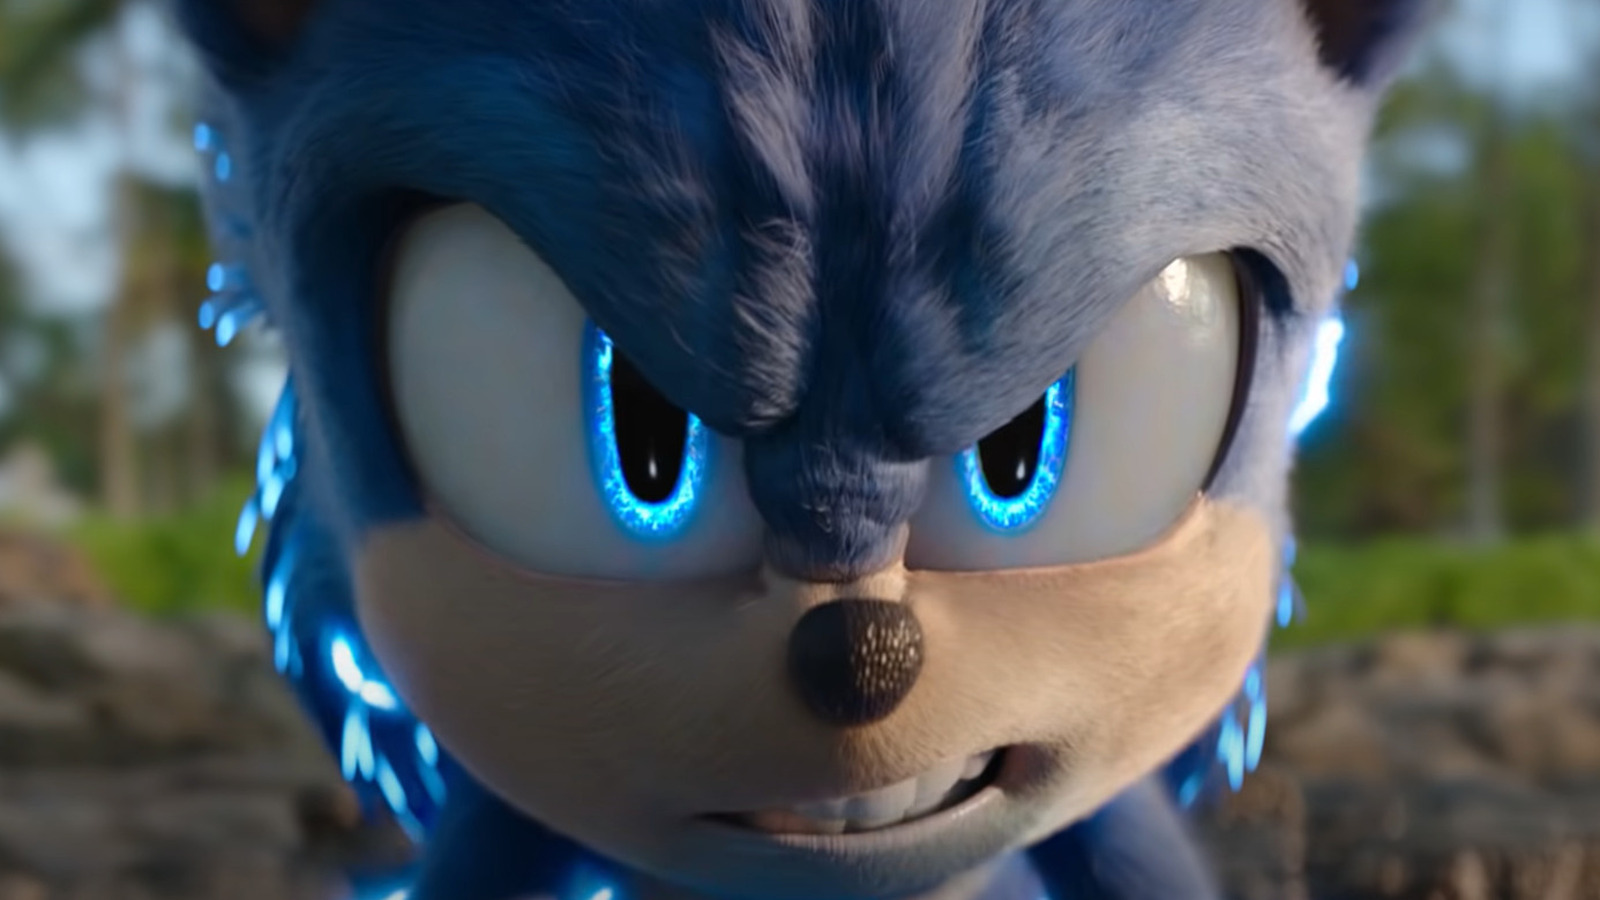 A Good Sonic the Hedgehog Movie? Not So Fast